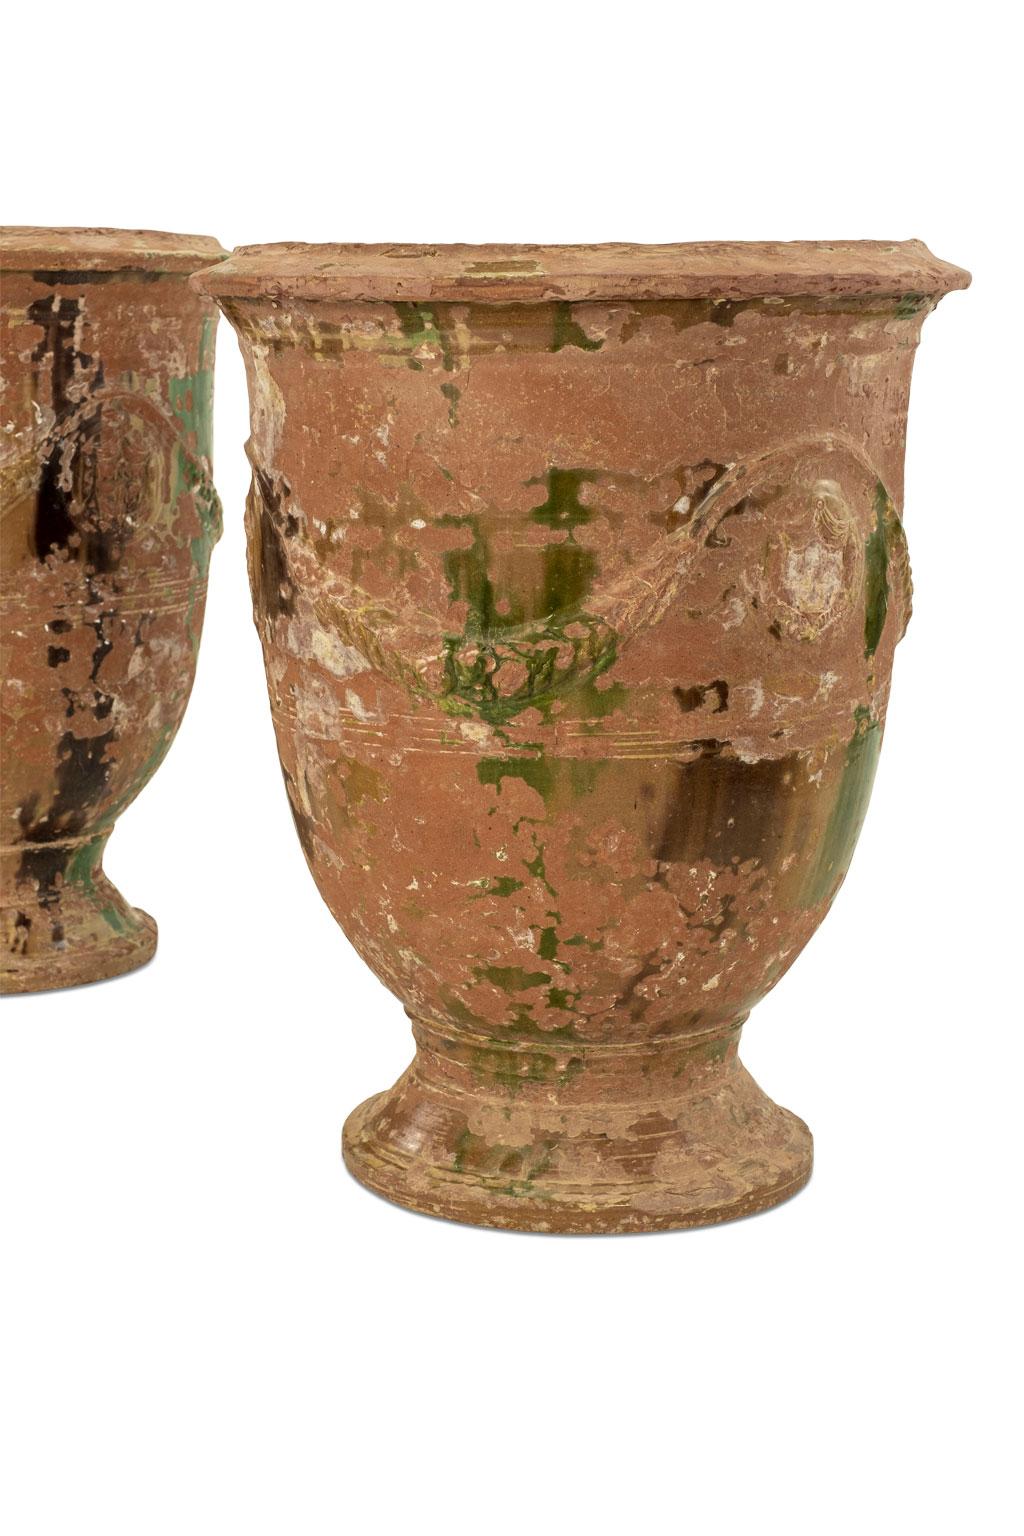 Glazed Pair of Large Early 19th Century Anduze Jars by Boisset